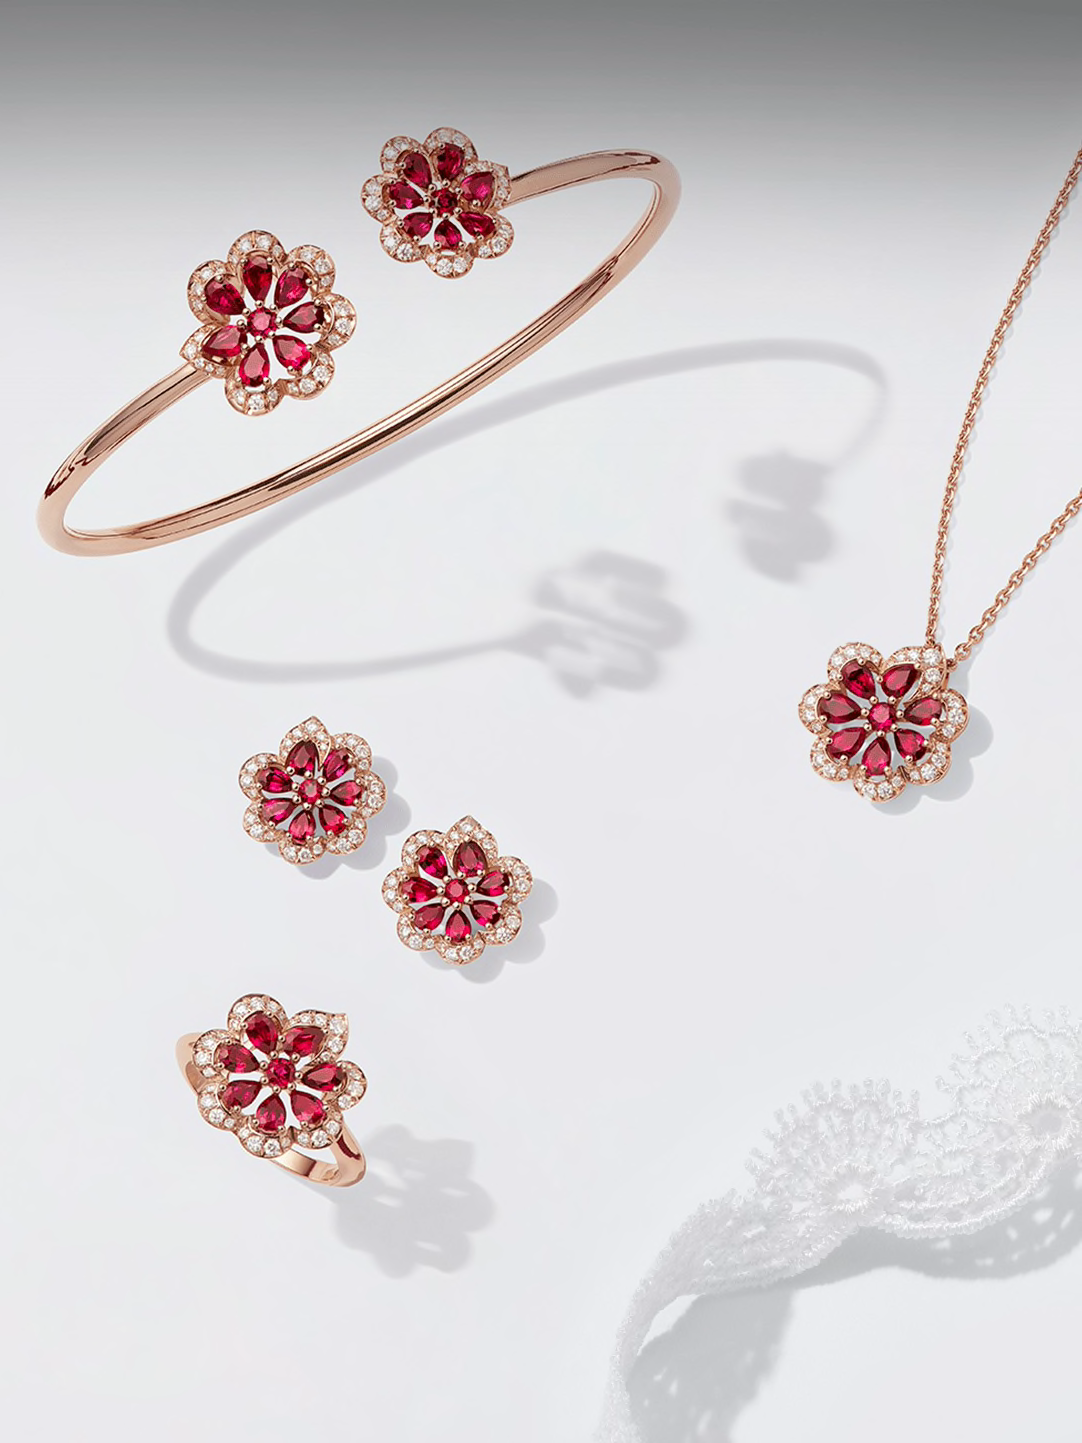 The Precious Lace High Jewellery collection by Chopard